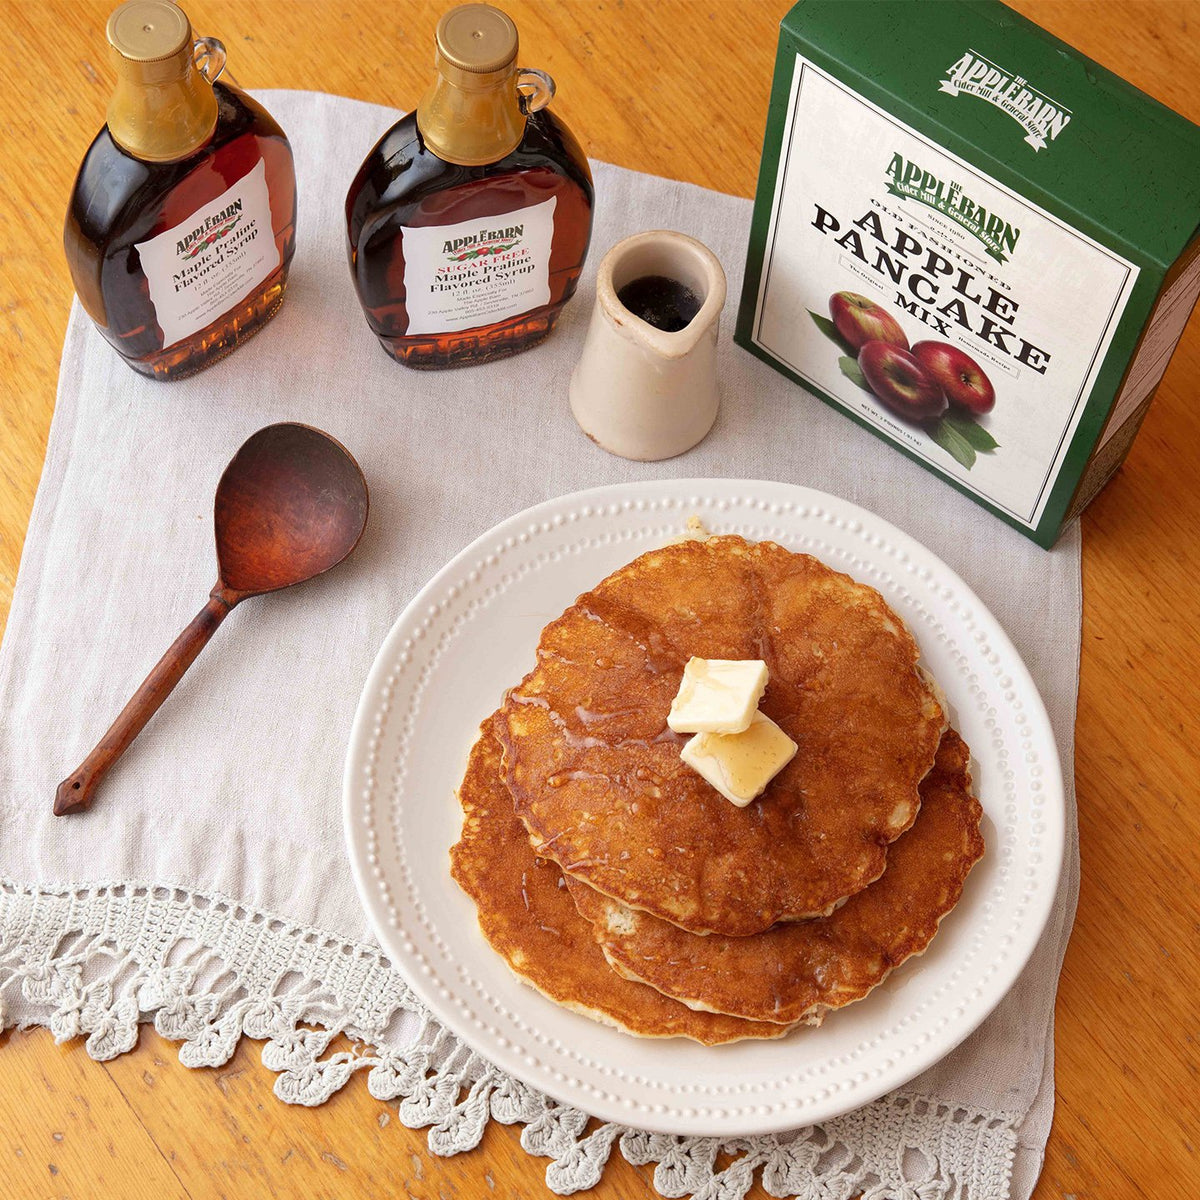 Maple praline flavored syrup on apple pancakes